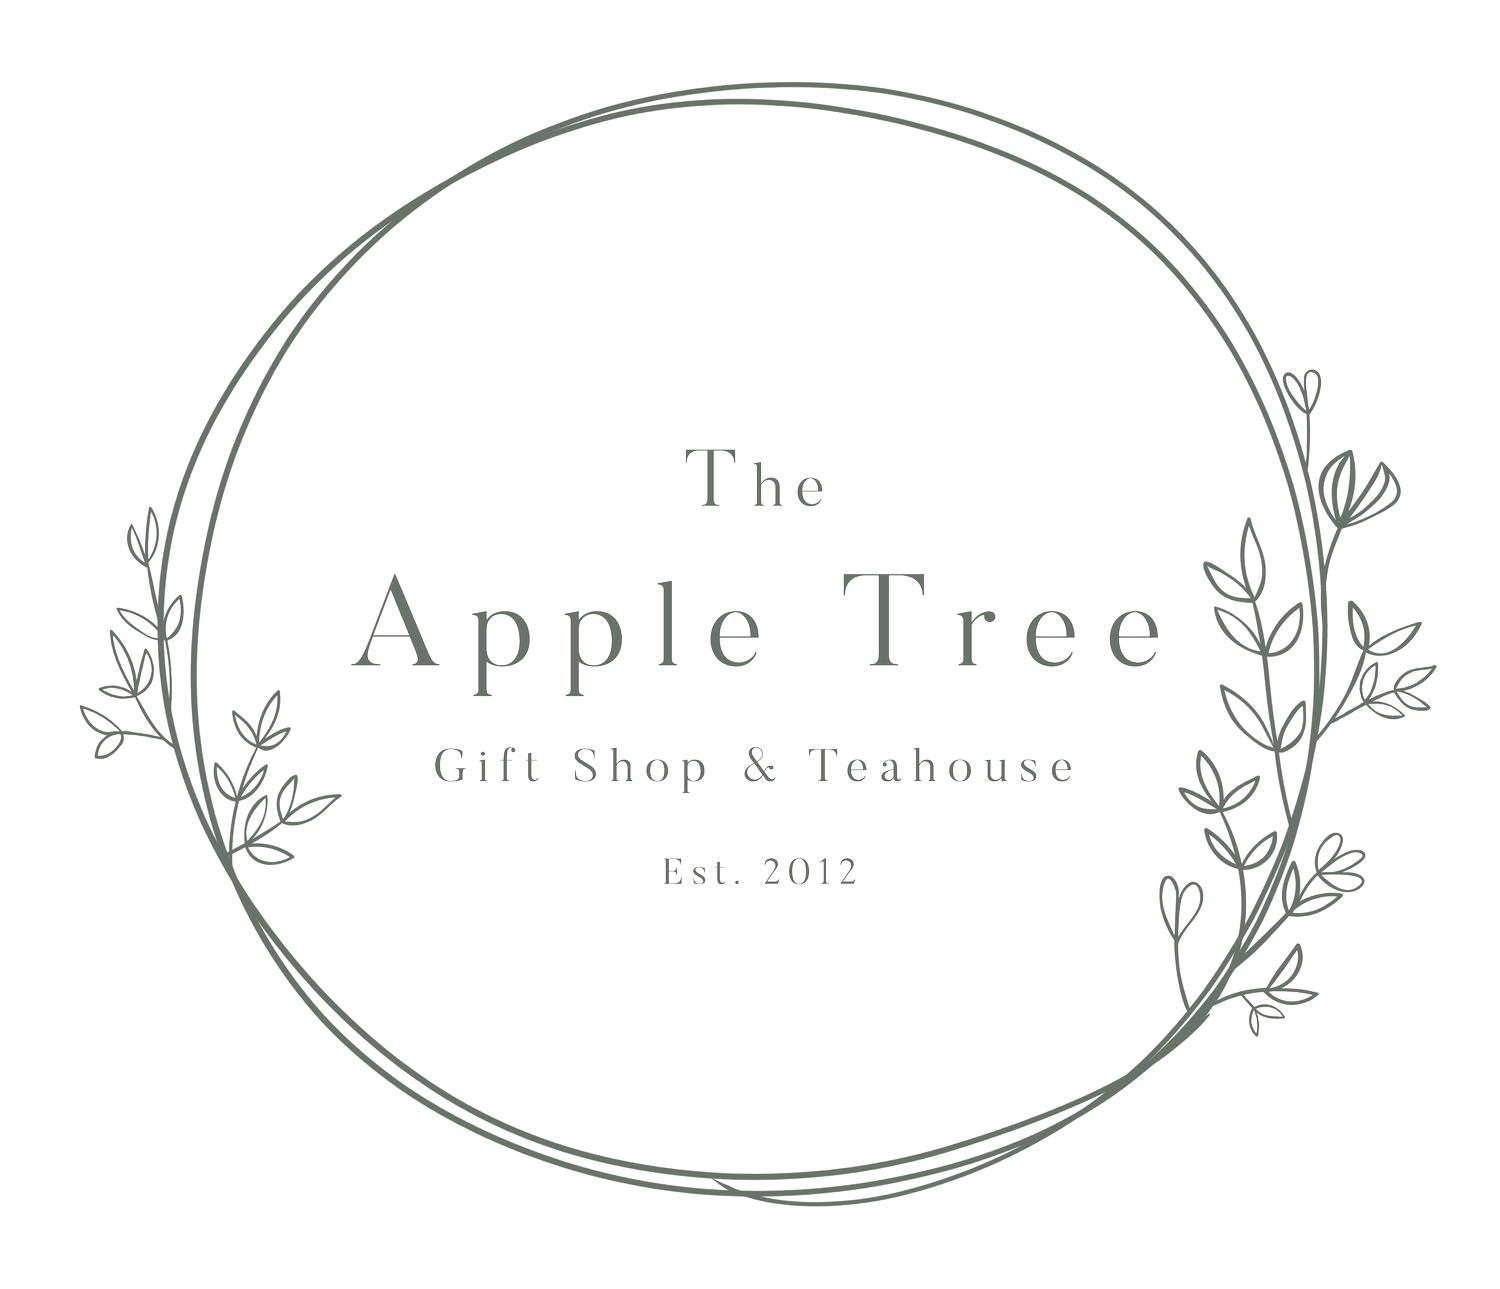 The Apple Tree Gift Shop and Teahouse